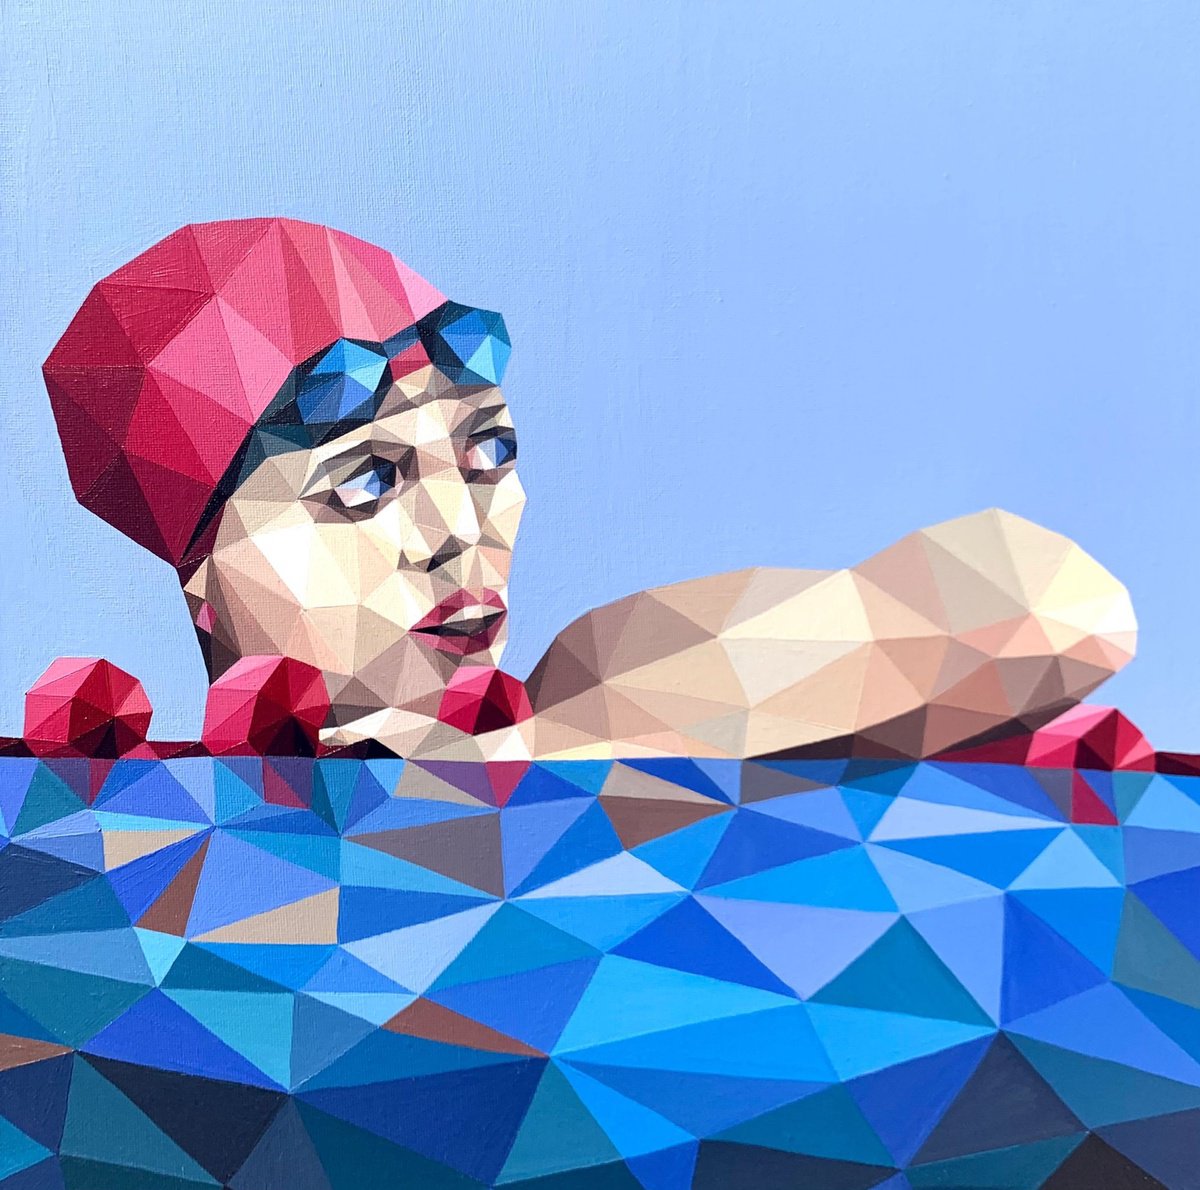 SWIMMER AFTER THE FINISH by Maria Tuzhilkina